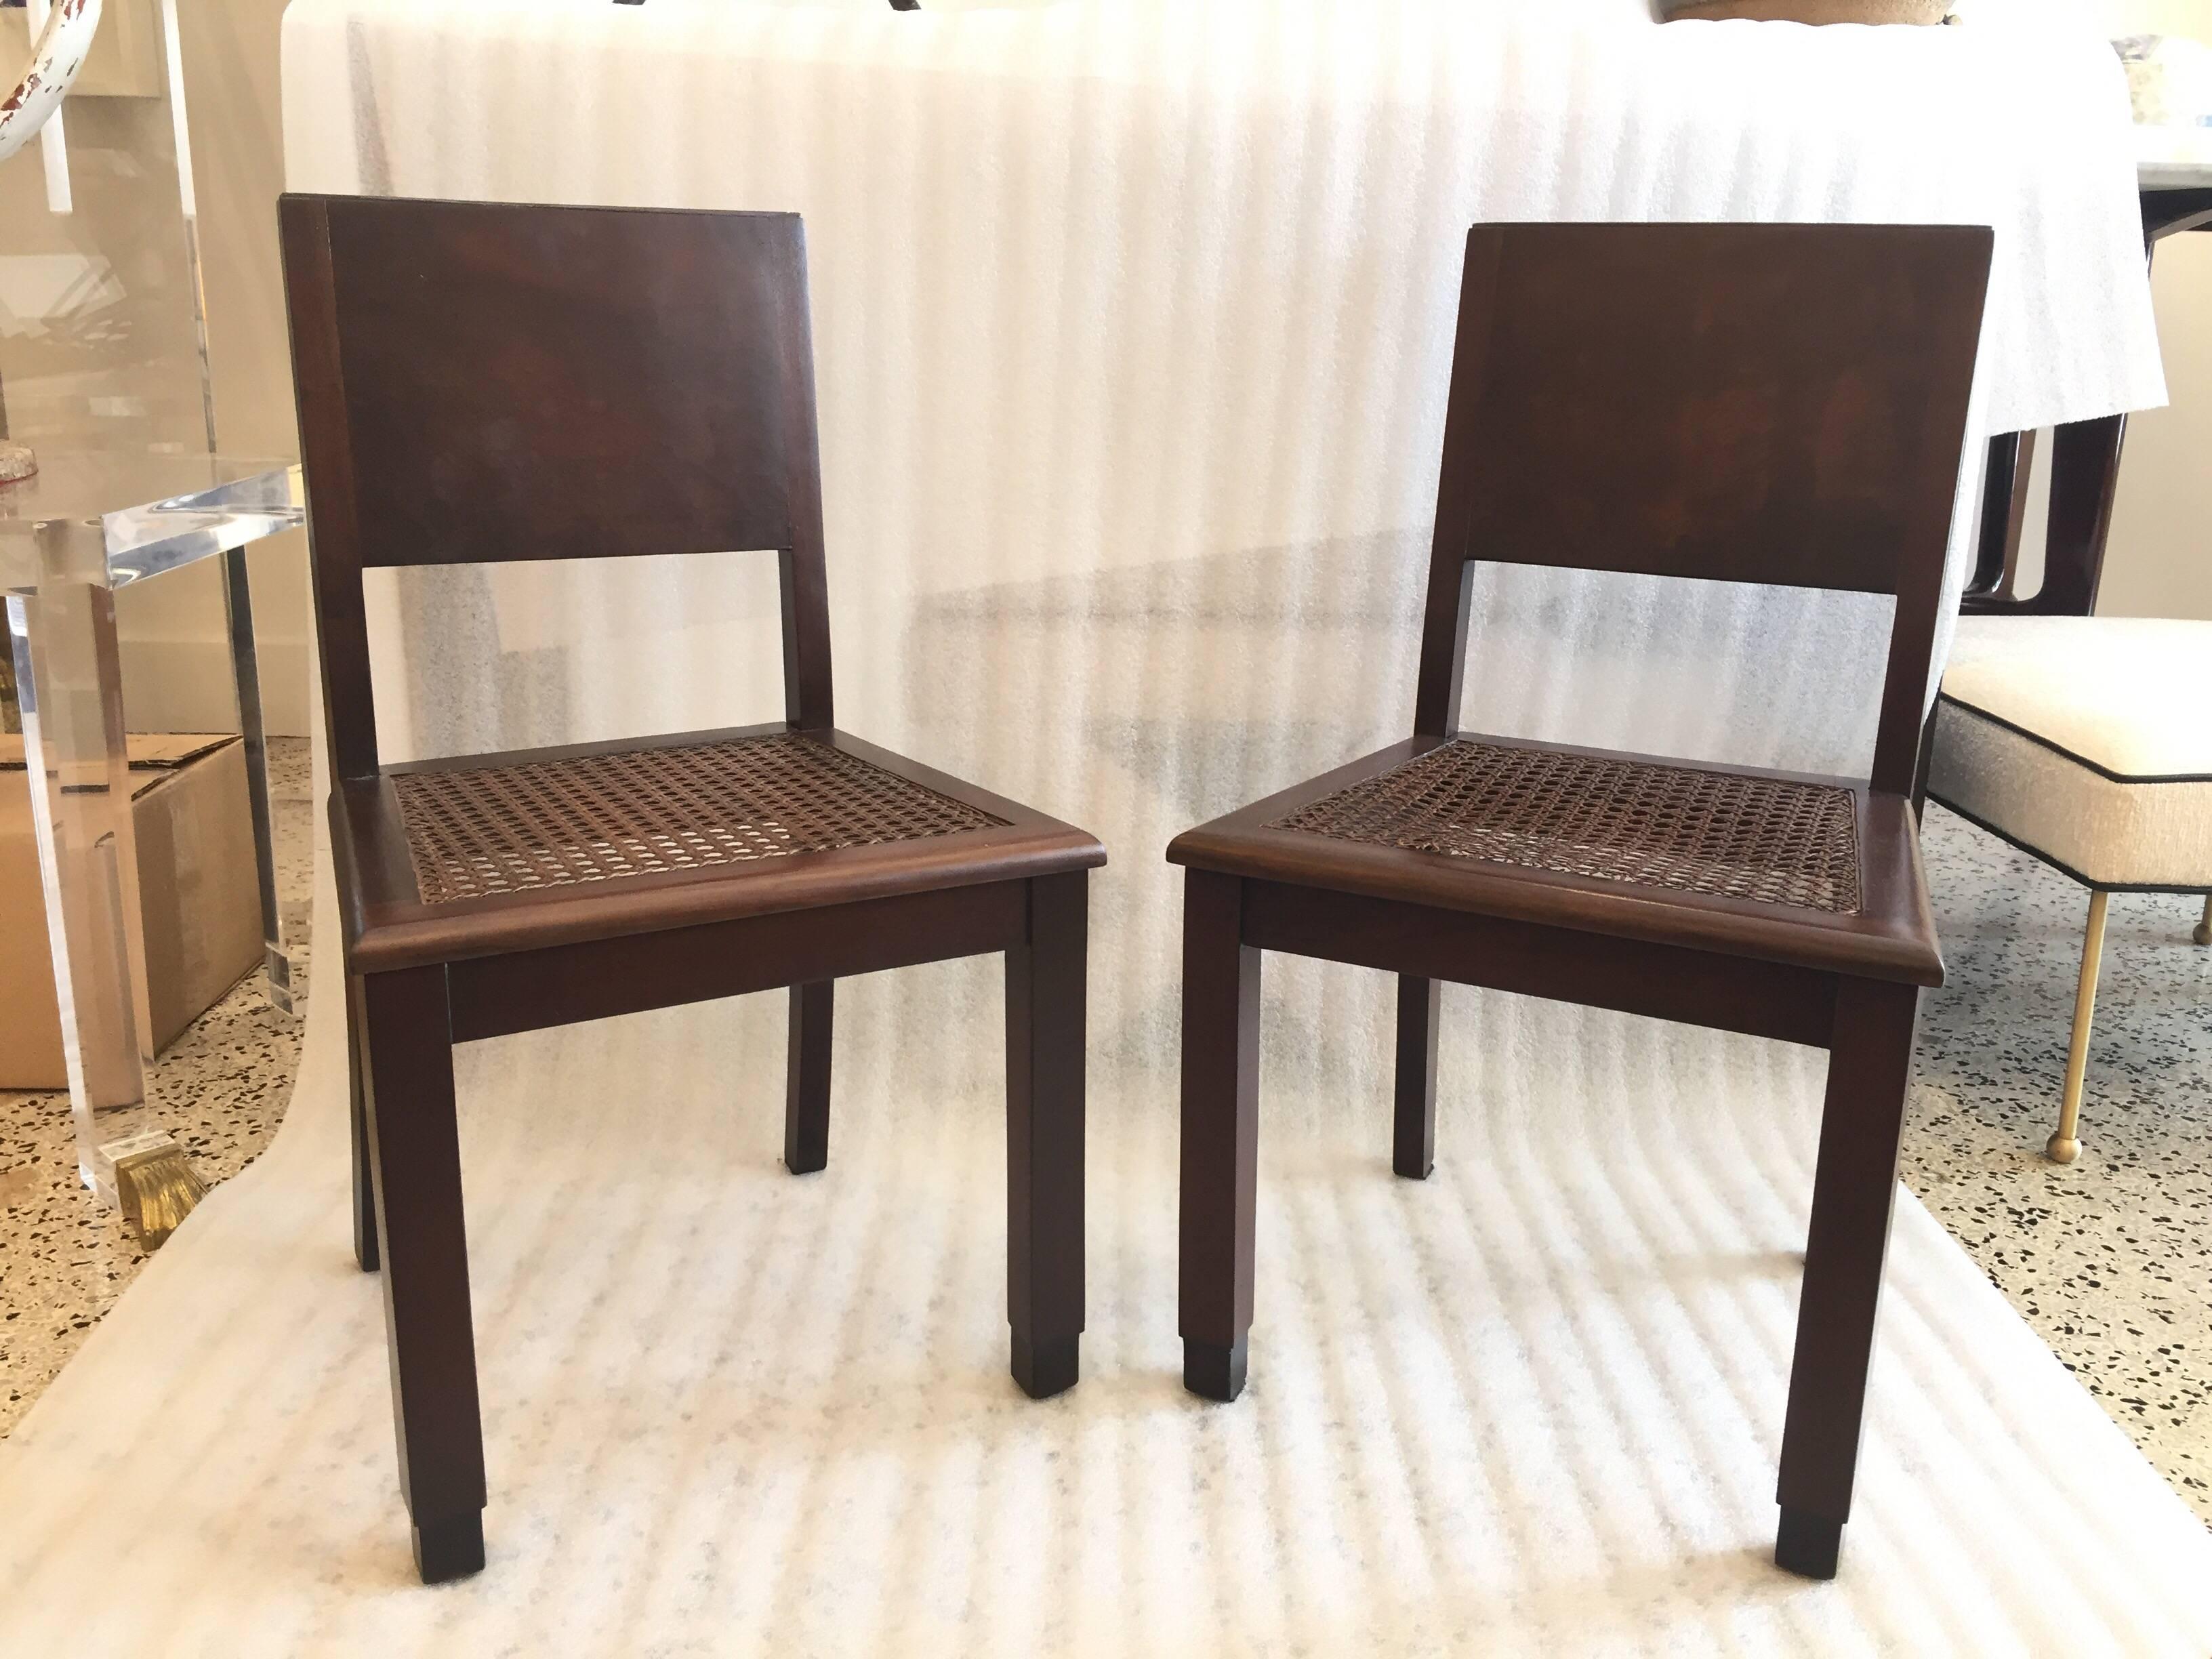 These truly special small scale chairs in Brazilian hardwood and original woven cane seats feature cheetah print cushions (removable) and just a wonderful dark finish. Very solid and in ready to use condition. Perfect for children's room, accent